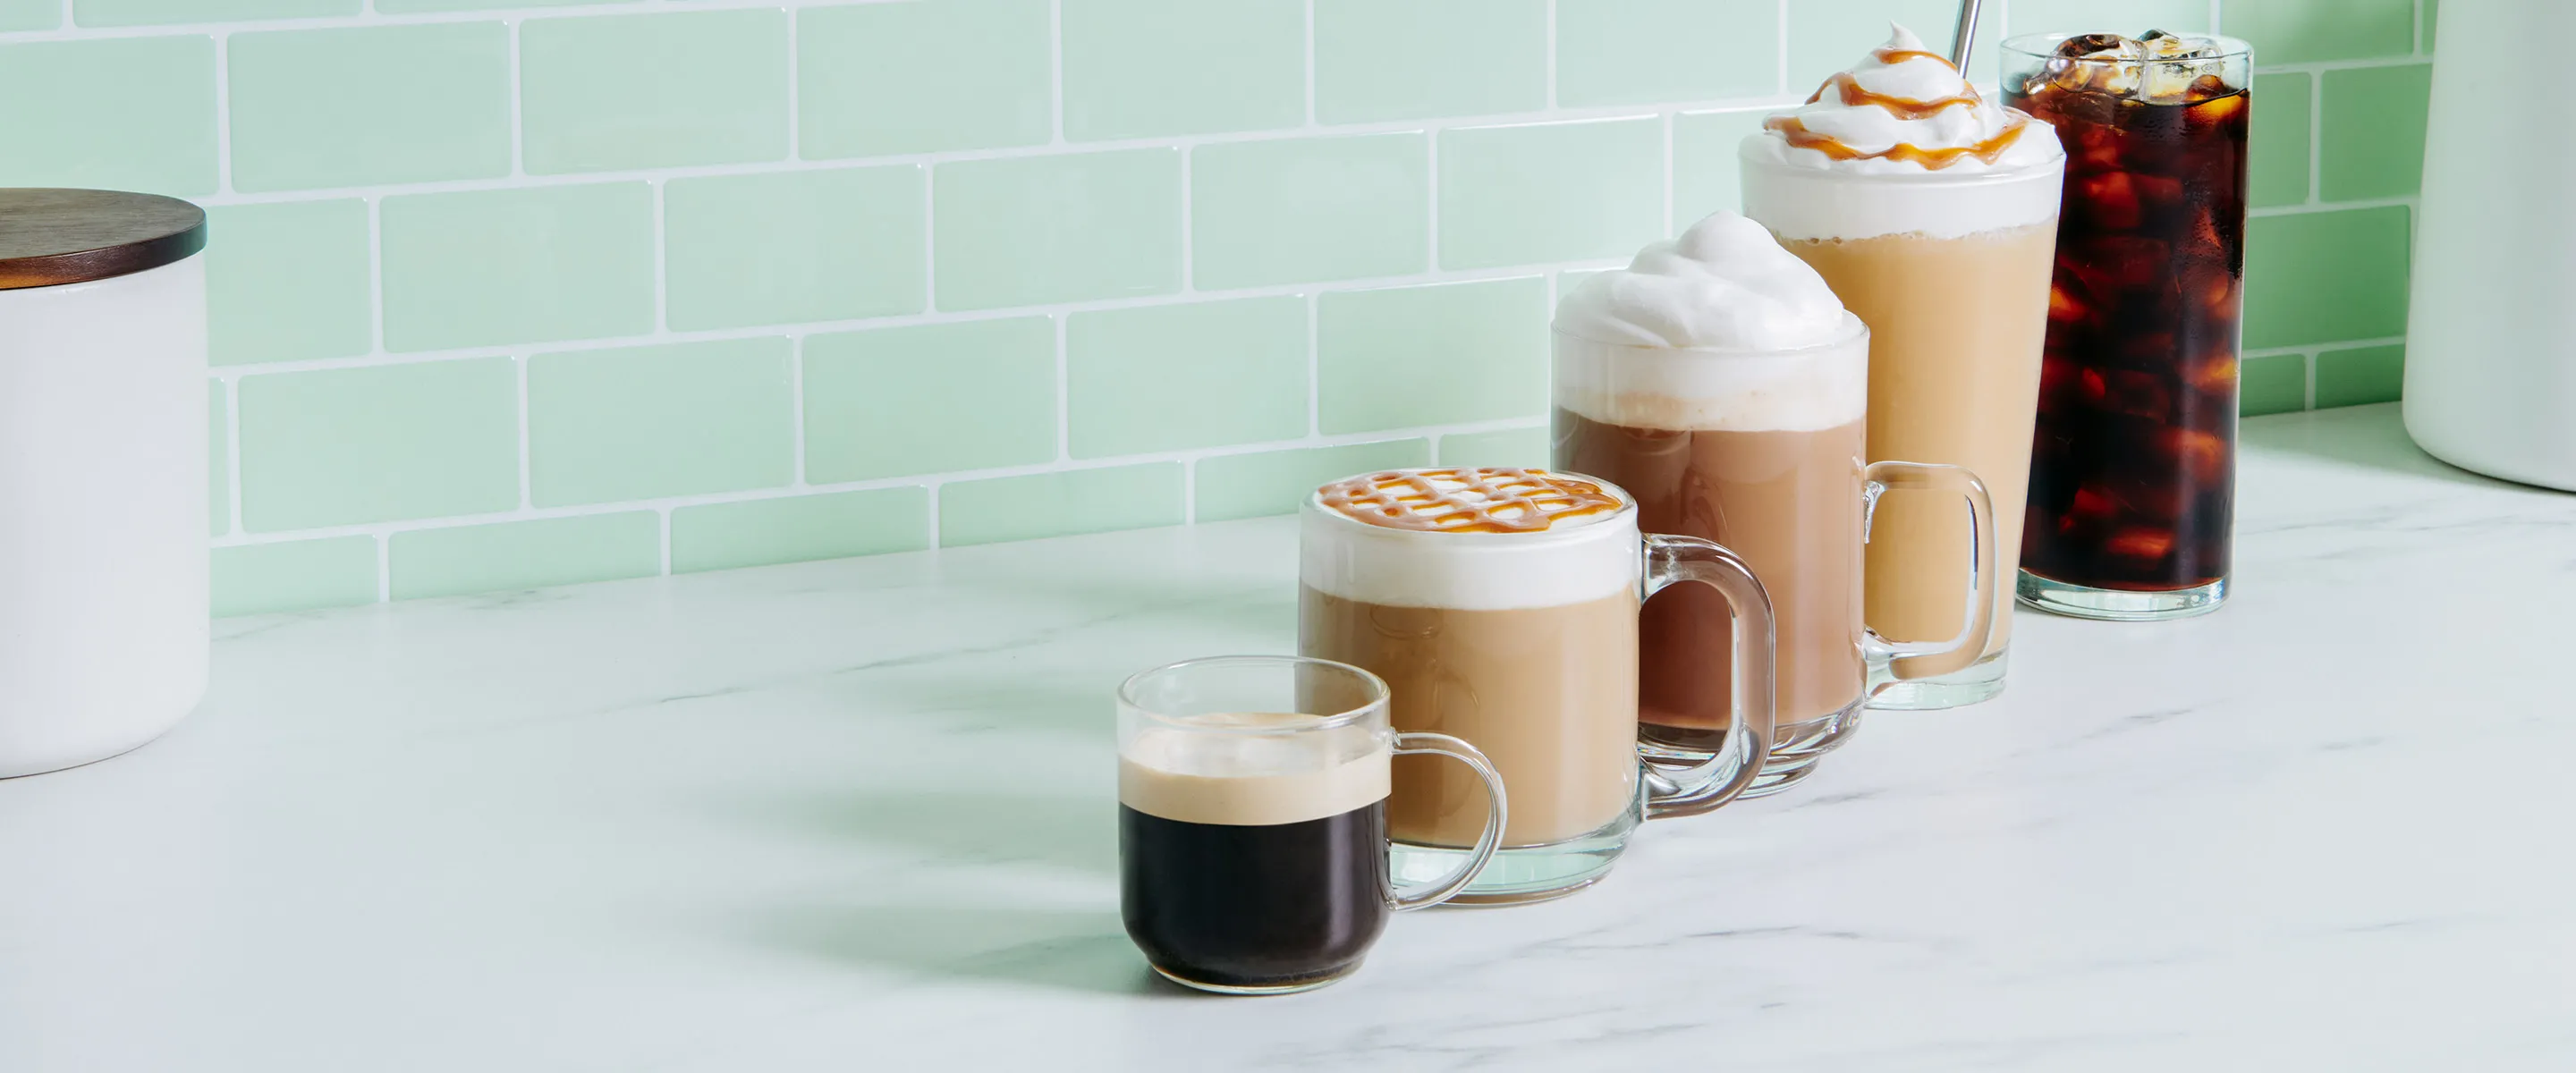 5 ICED NESPRESSO RECIPES you need to try!!! 